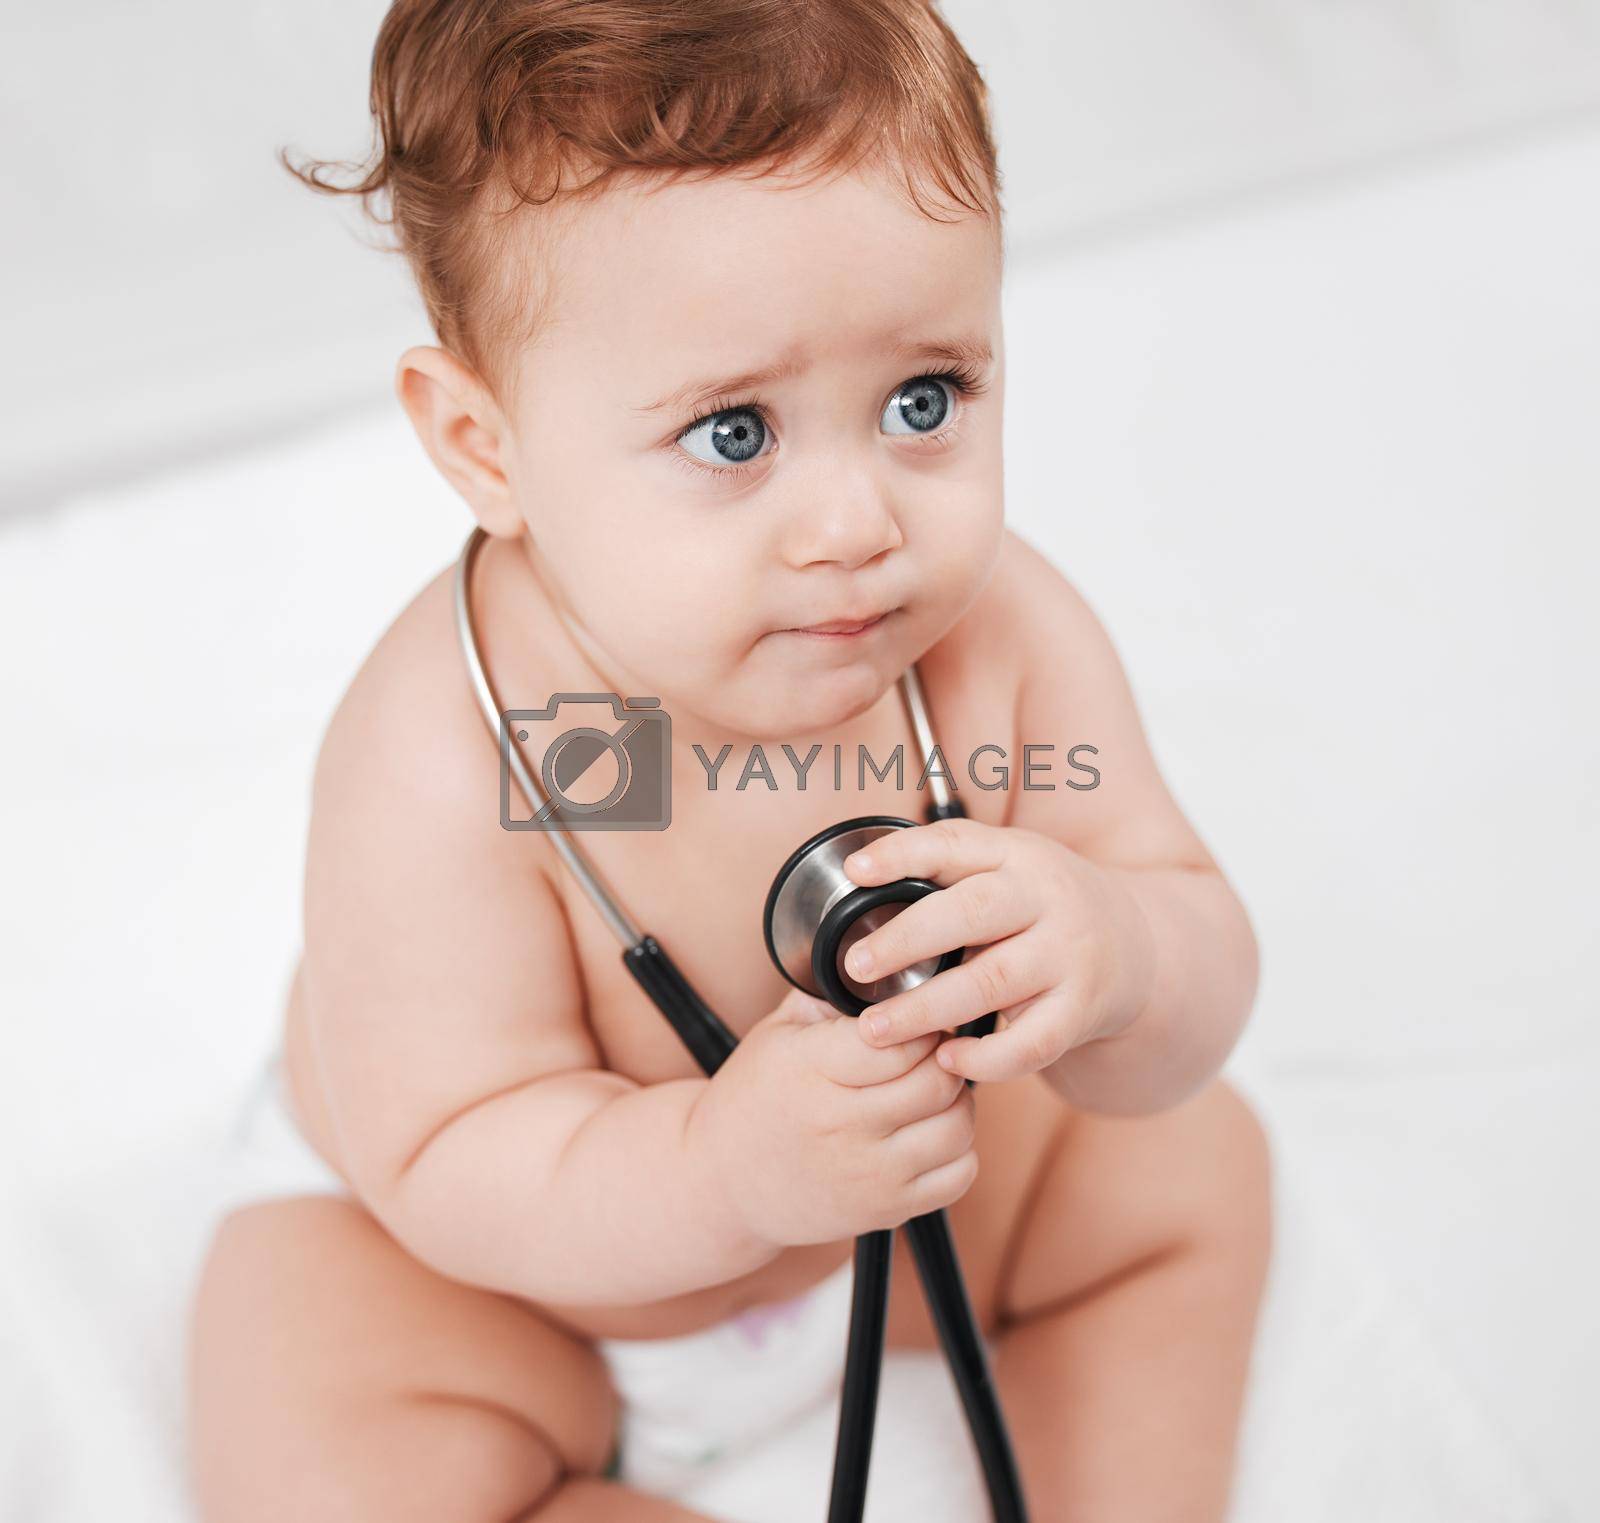 Royalty free image of Erm, lady doctor will this hurt. an adorable little baby boy hold a stethoscope in a clinic during his checkup. by YuriArcurs